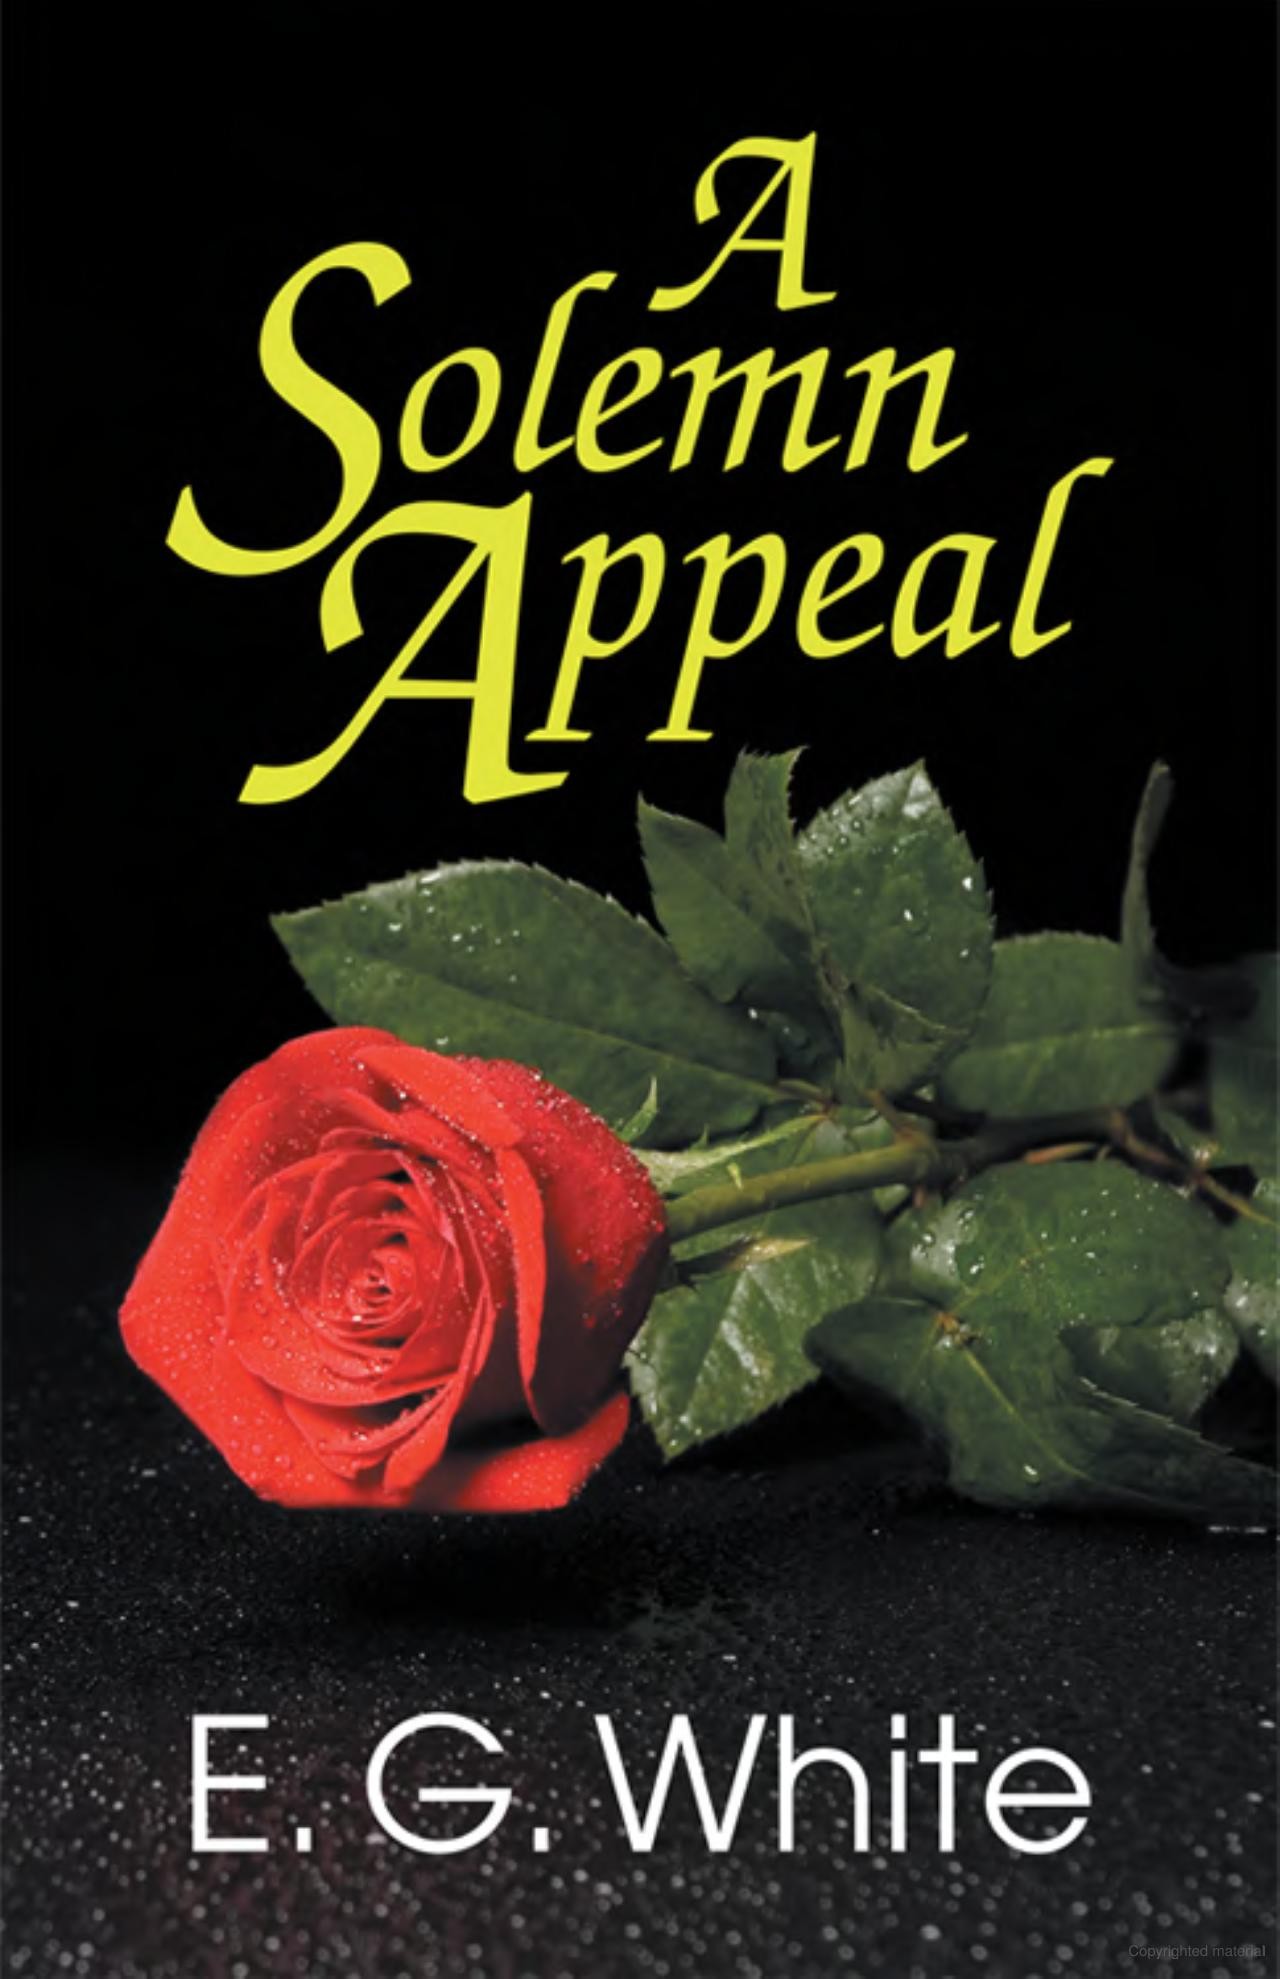 A Solemn Appeal